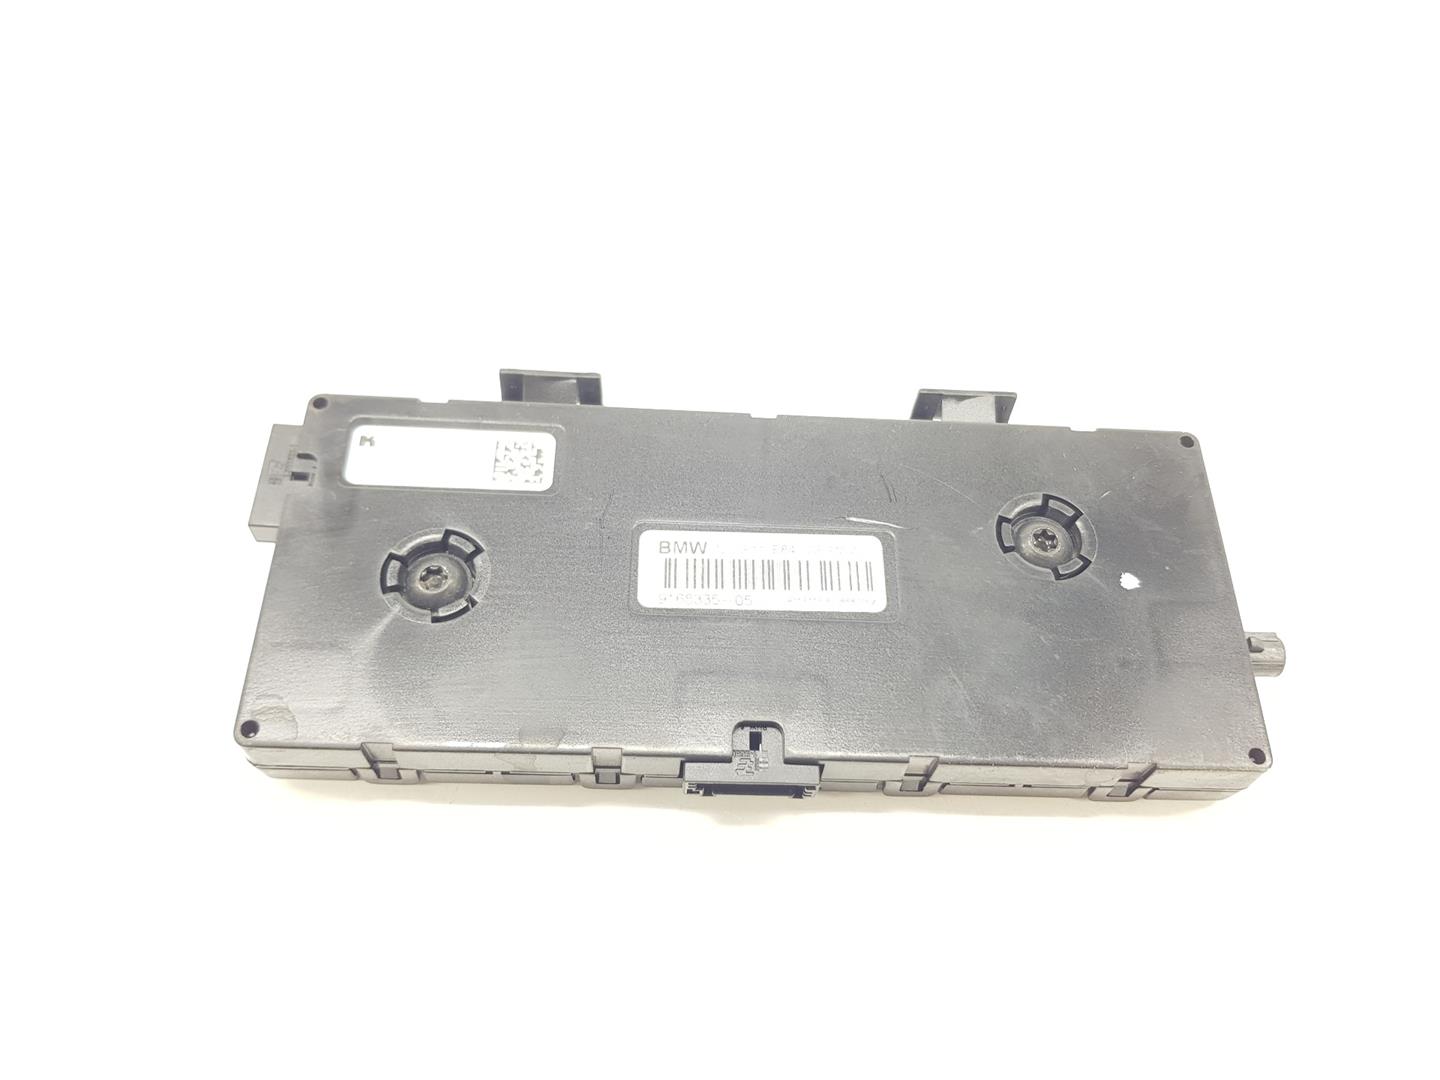 BMW X1 E84 (2009-2015) Other Control Units 9168335, 65209168335 23894839